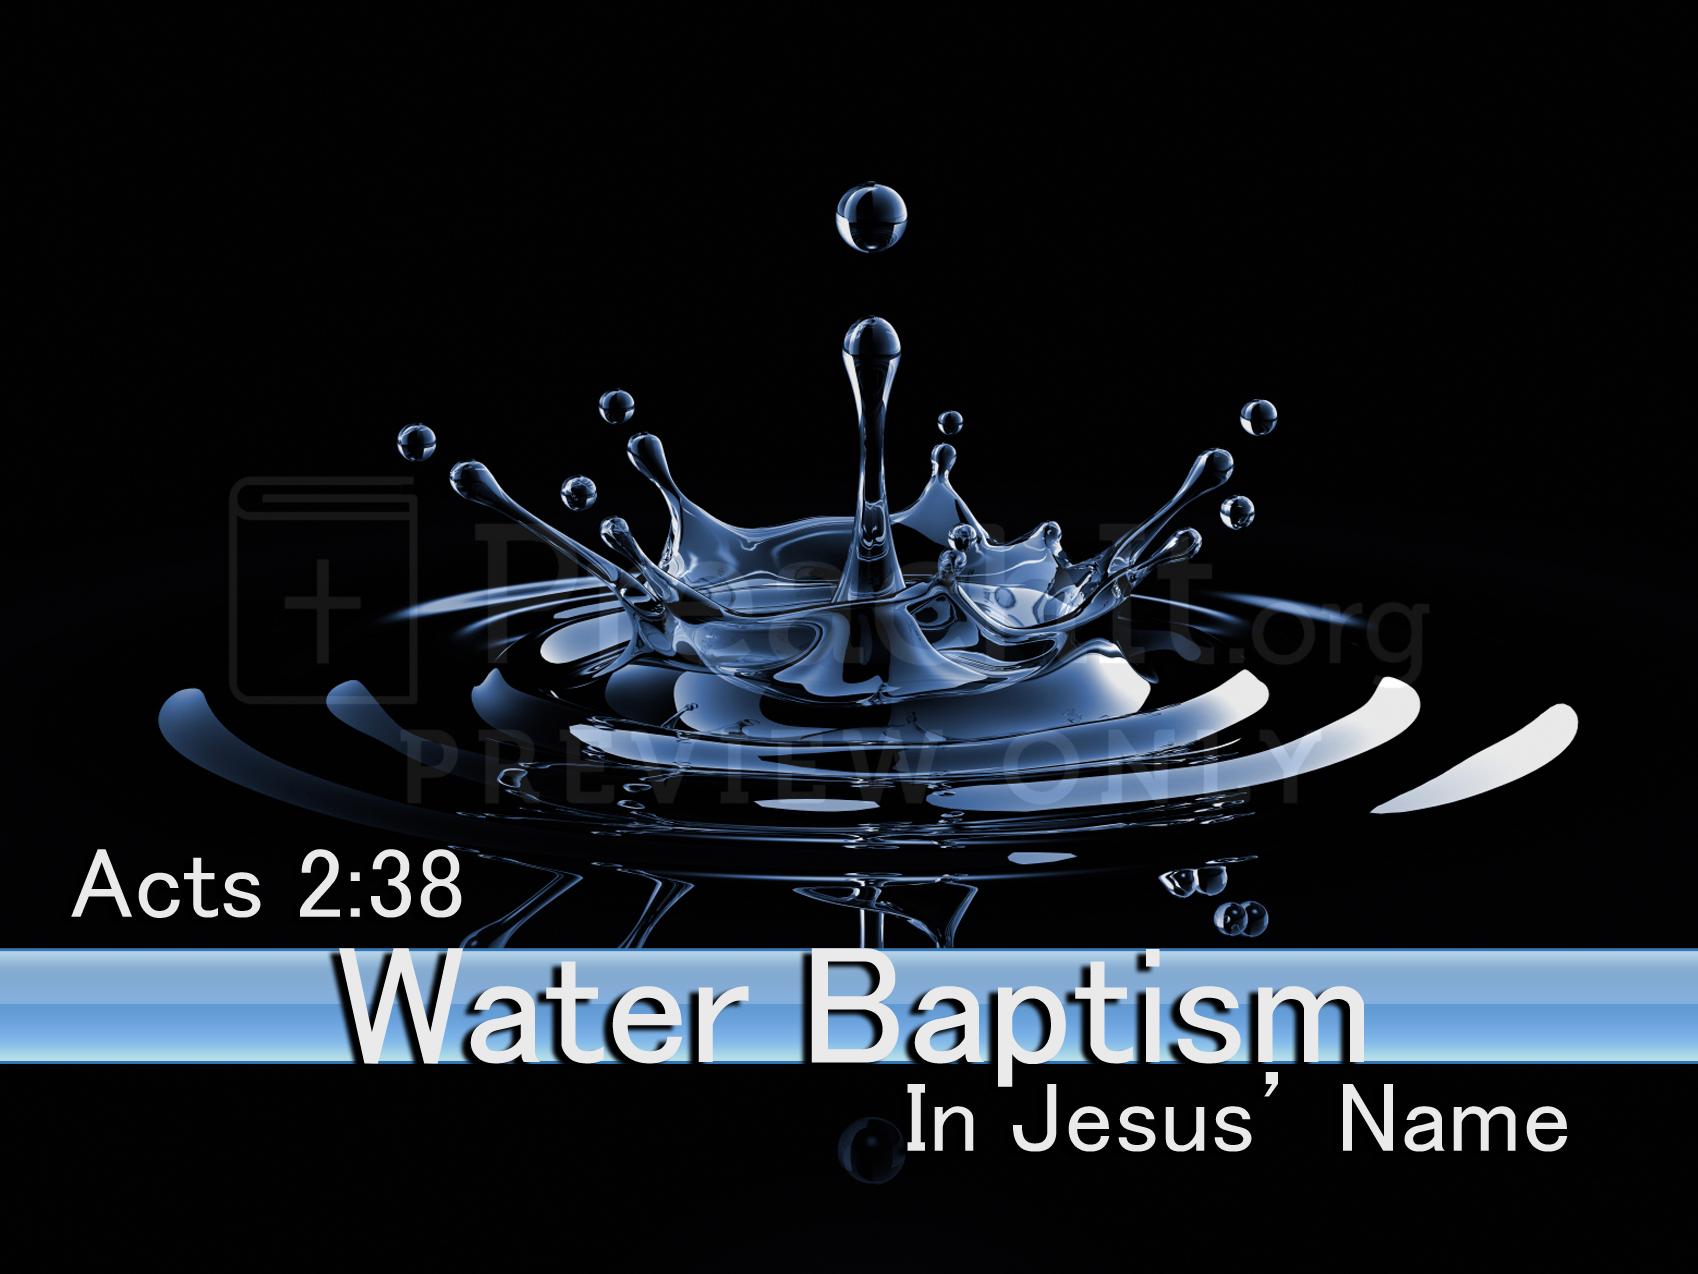 Lesson 2: Baptism In The Name Of Jesus